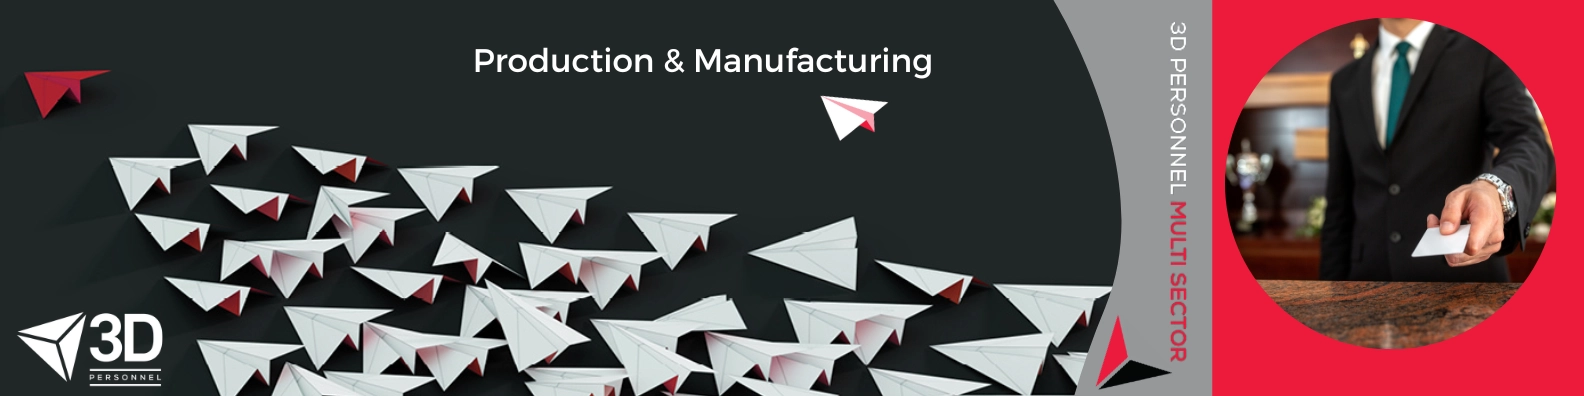 Production & Manufacturing graphic